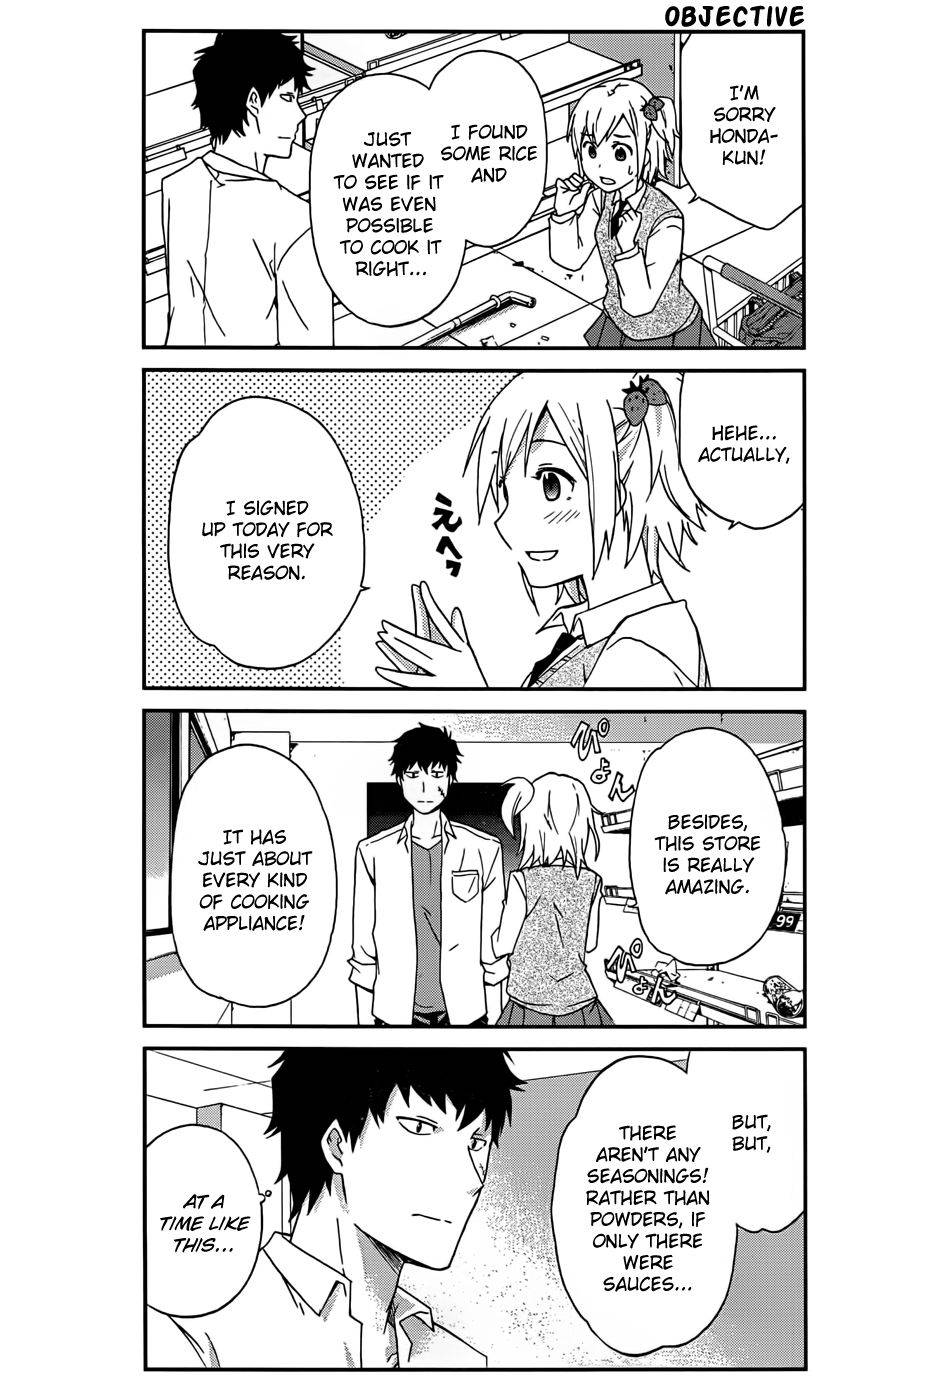 Are You Alive Honda-Kun? - chapter 1 - #5